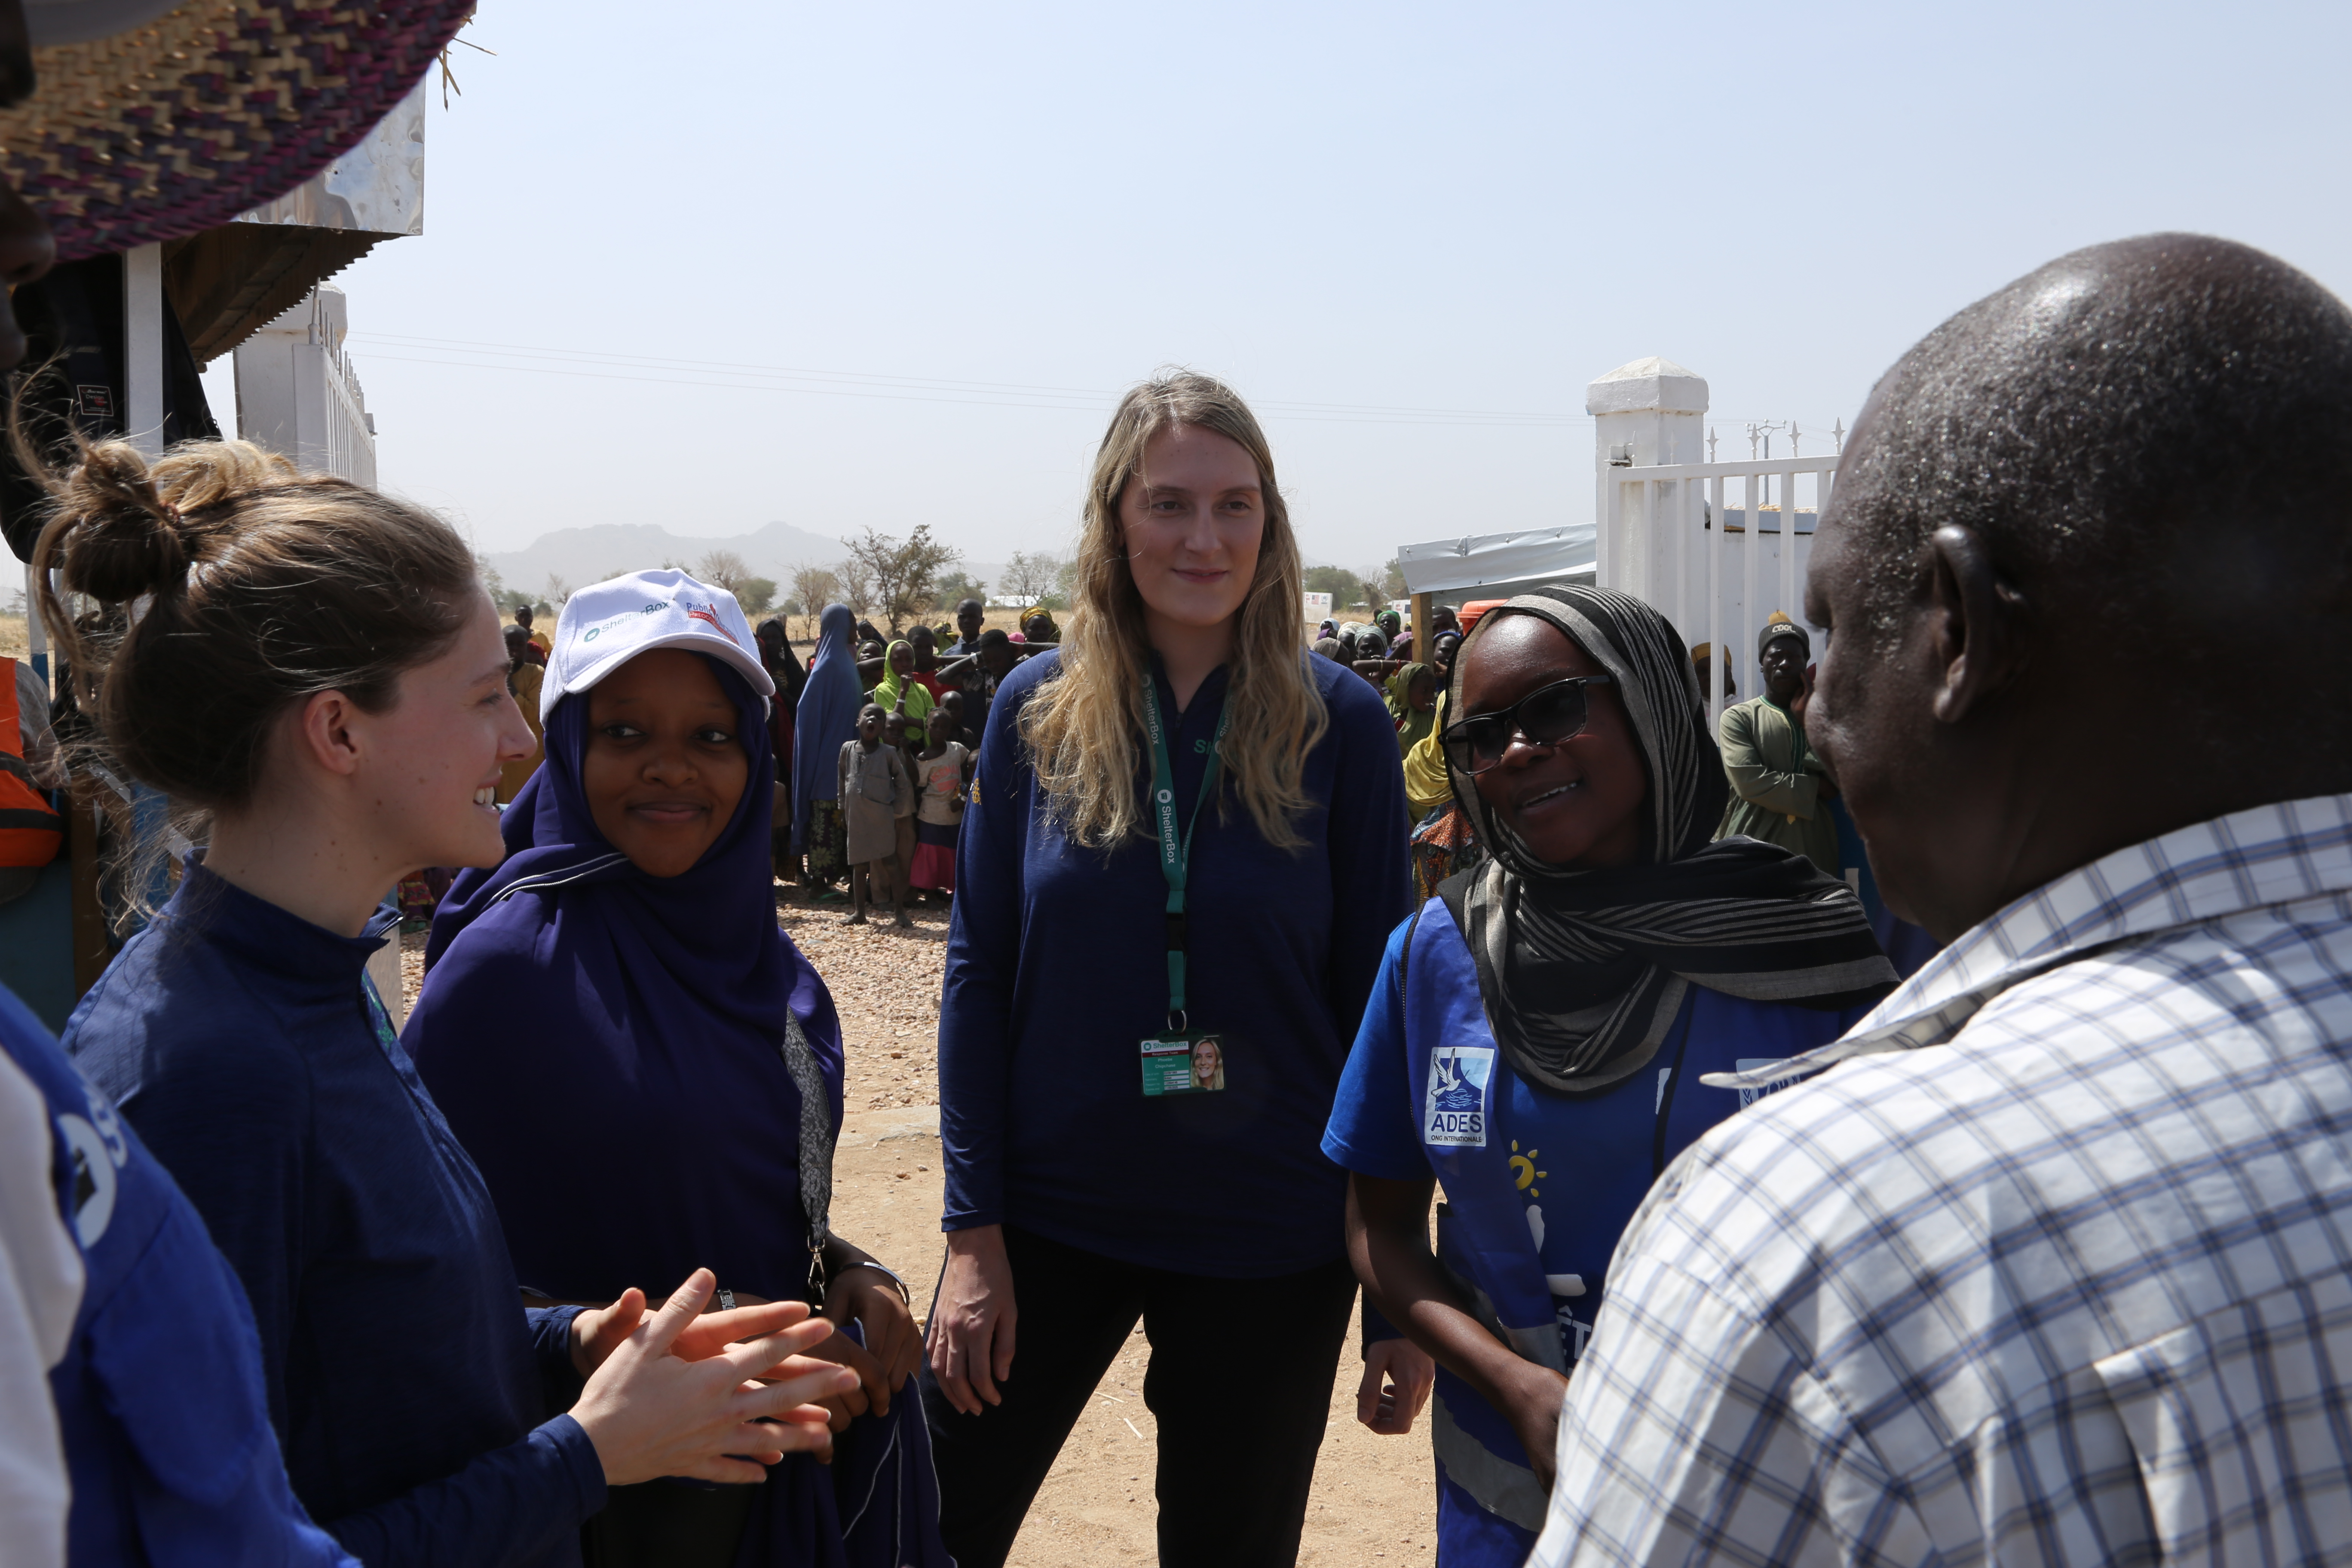 People standing and talking while on deployment as humanitarians